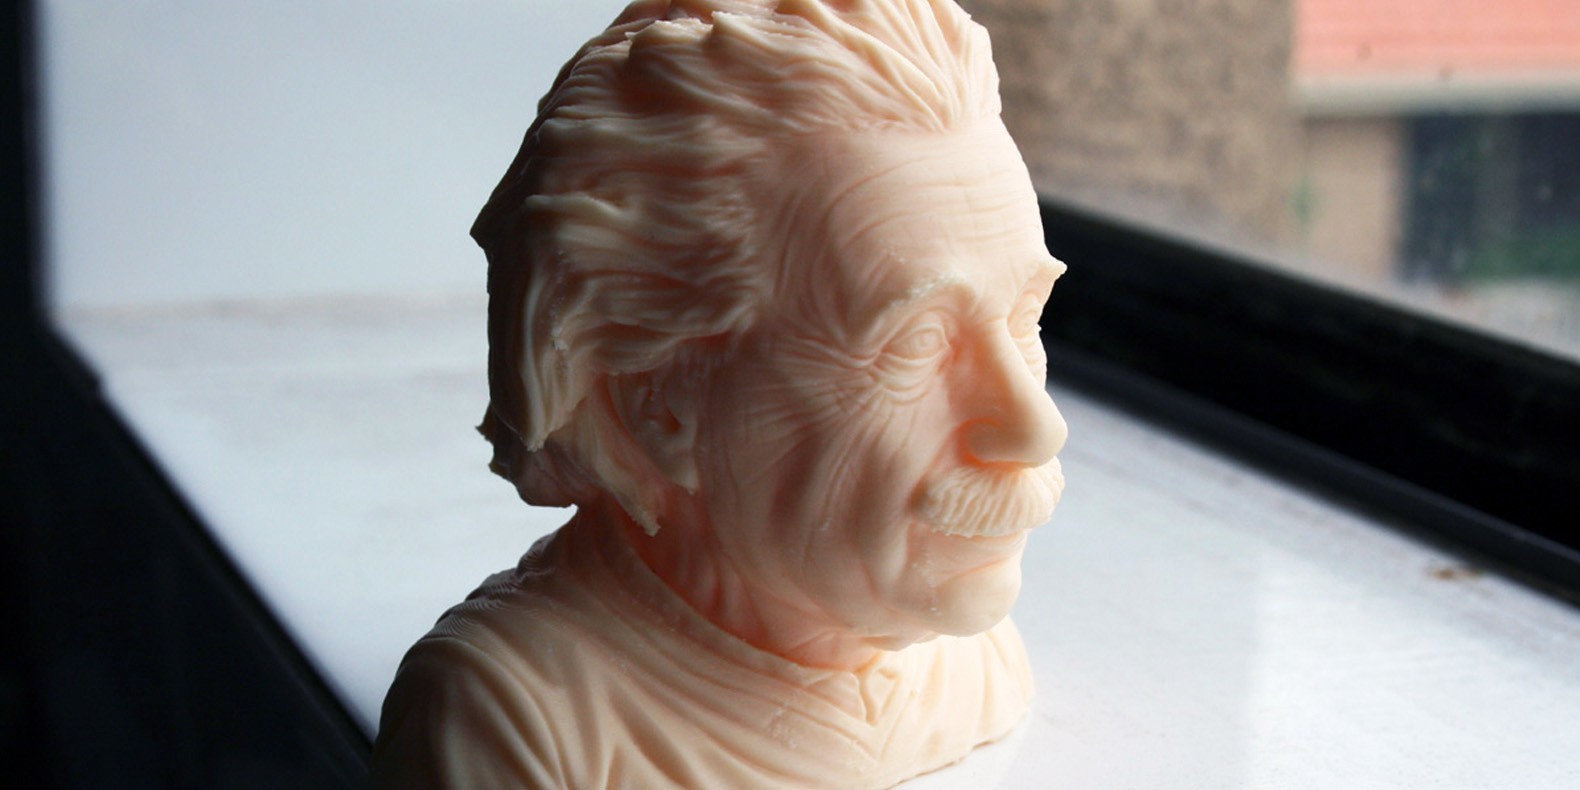 Here is a selection of the best busts 3D models to make with a 3D printer